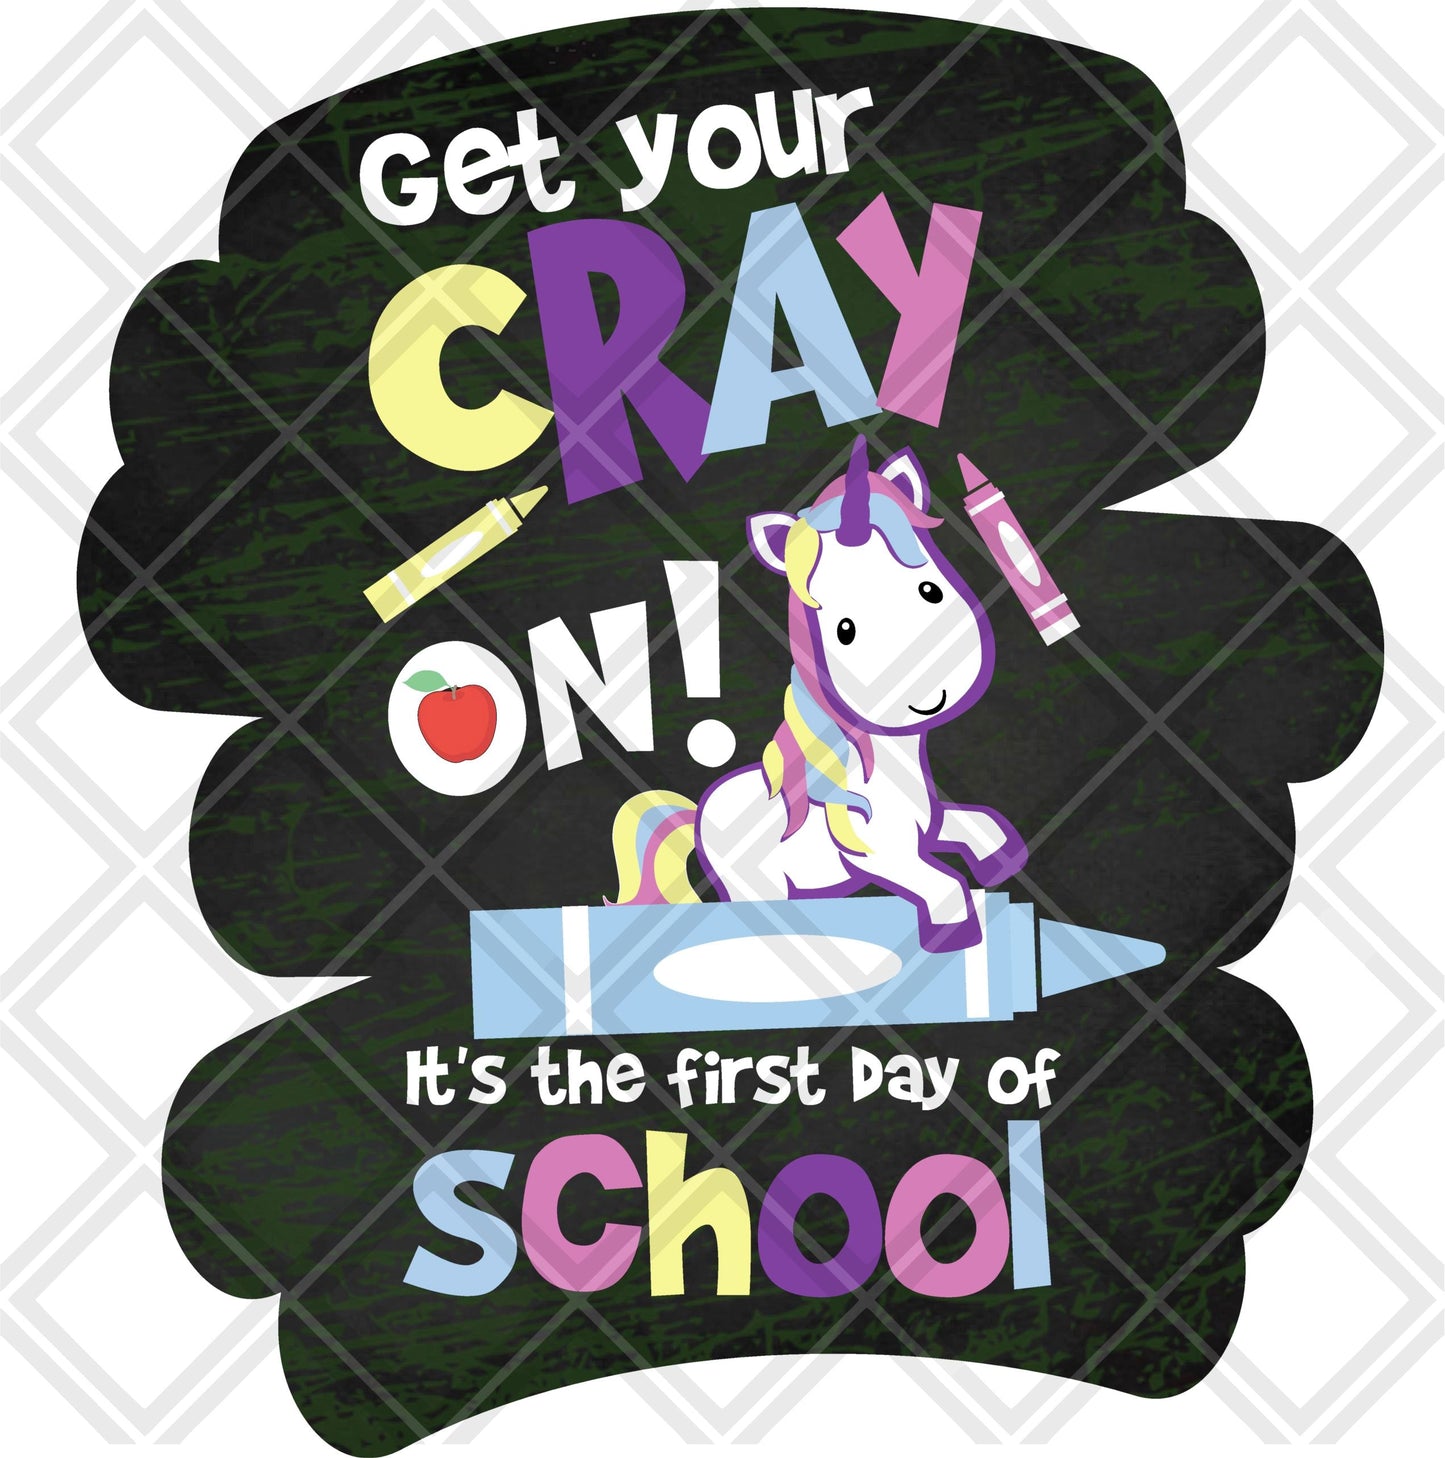 Get your cray on its the first day of school unicorn frame Digital Download Instand Download